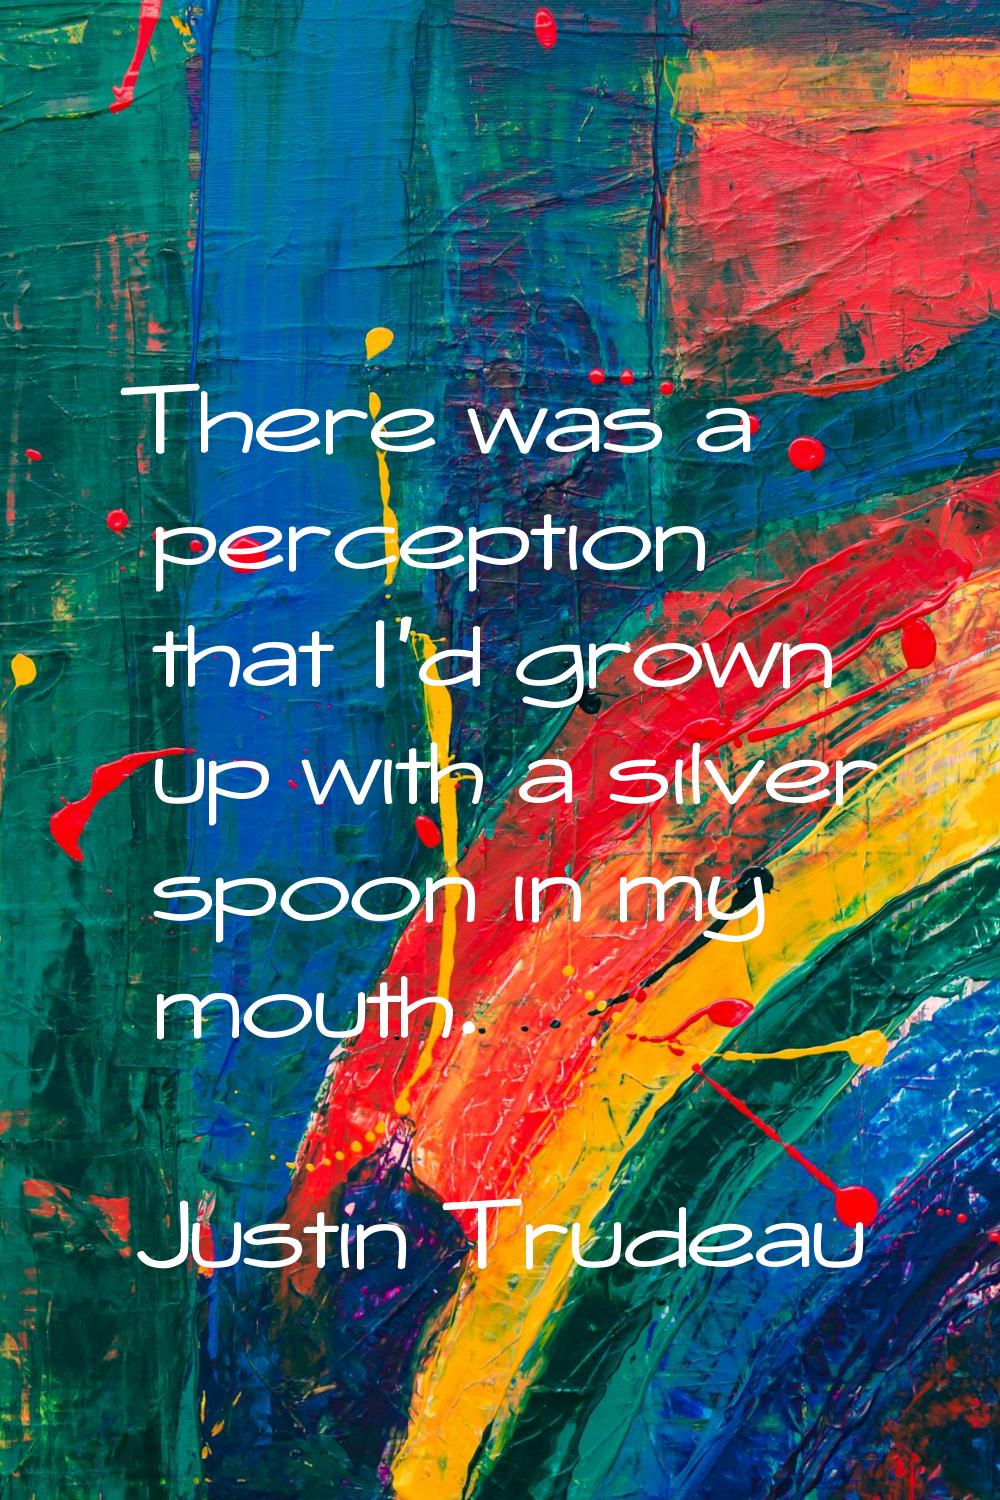 There was a perception that I'd grown up with a silver spoon in my mouth.